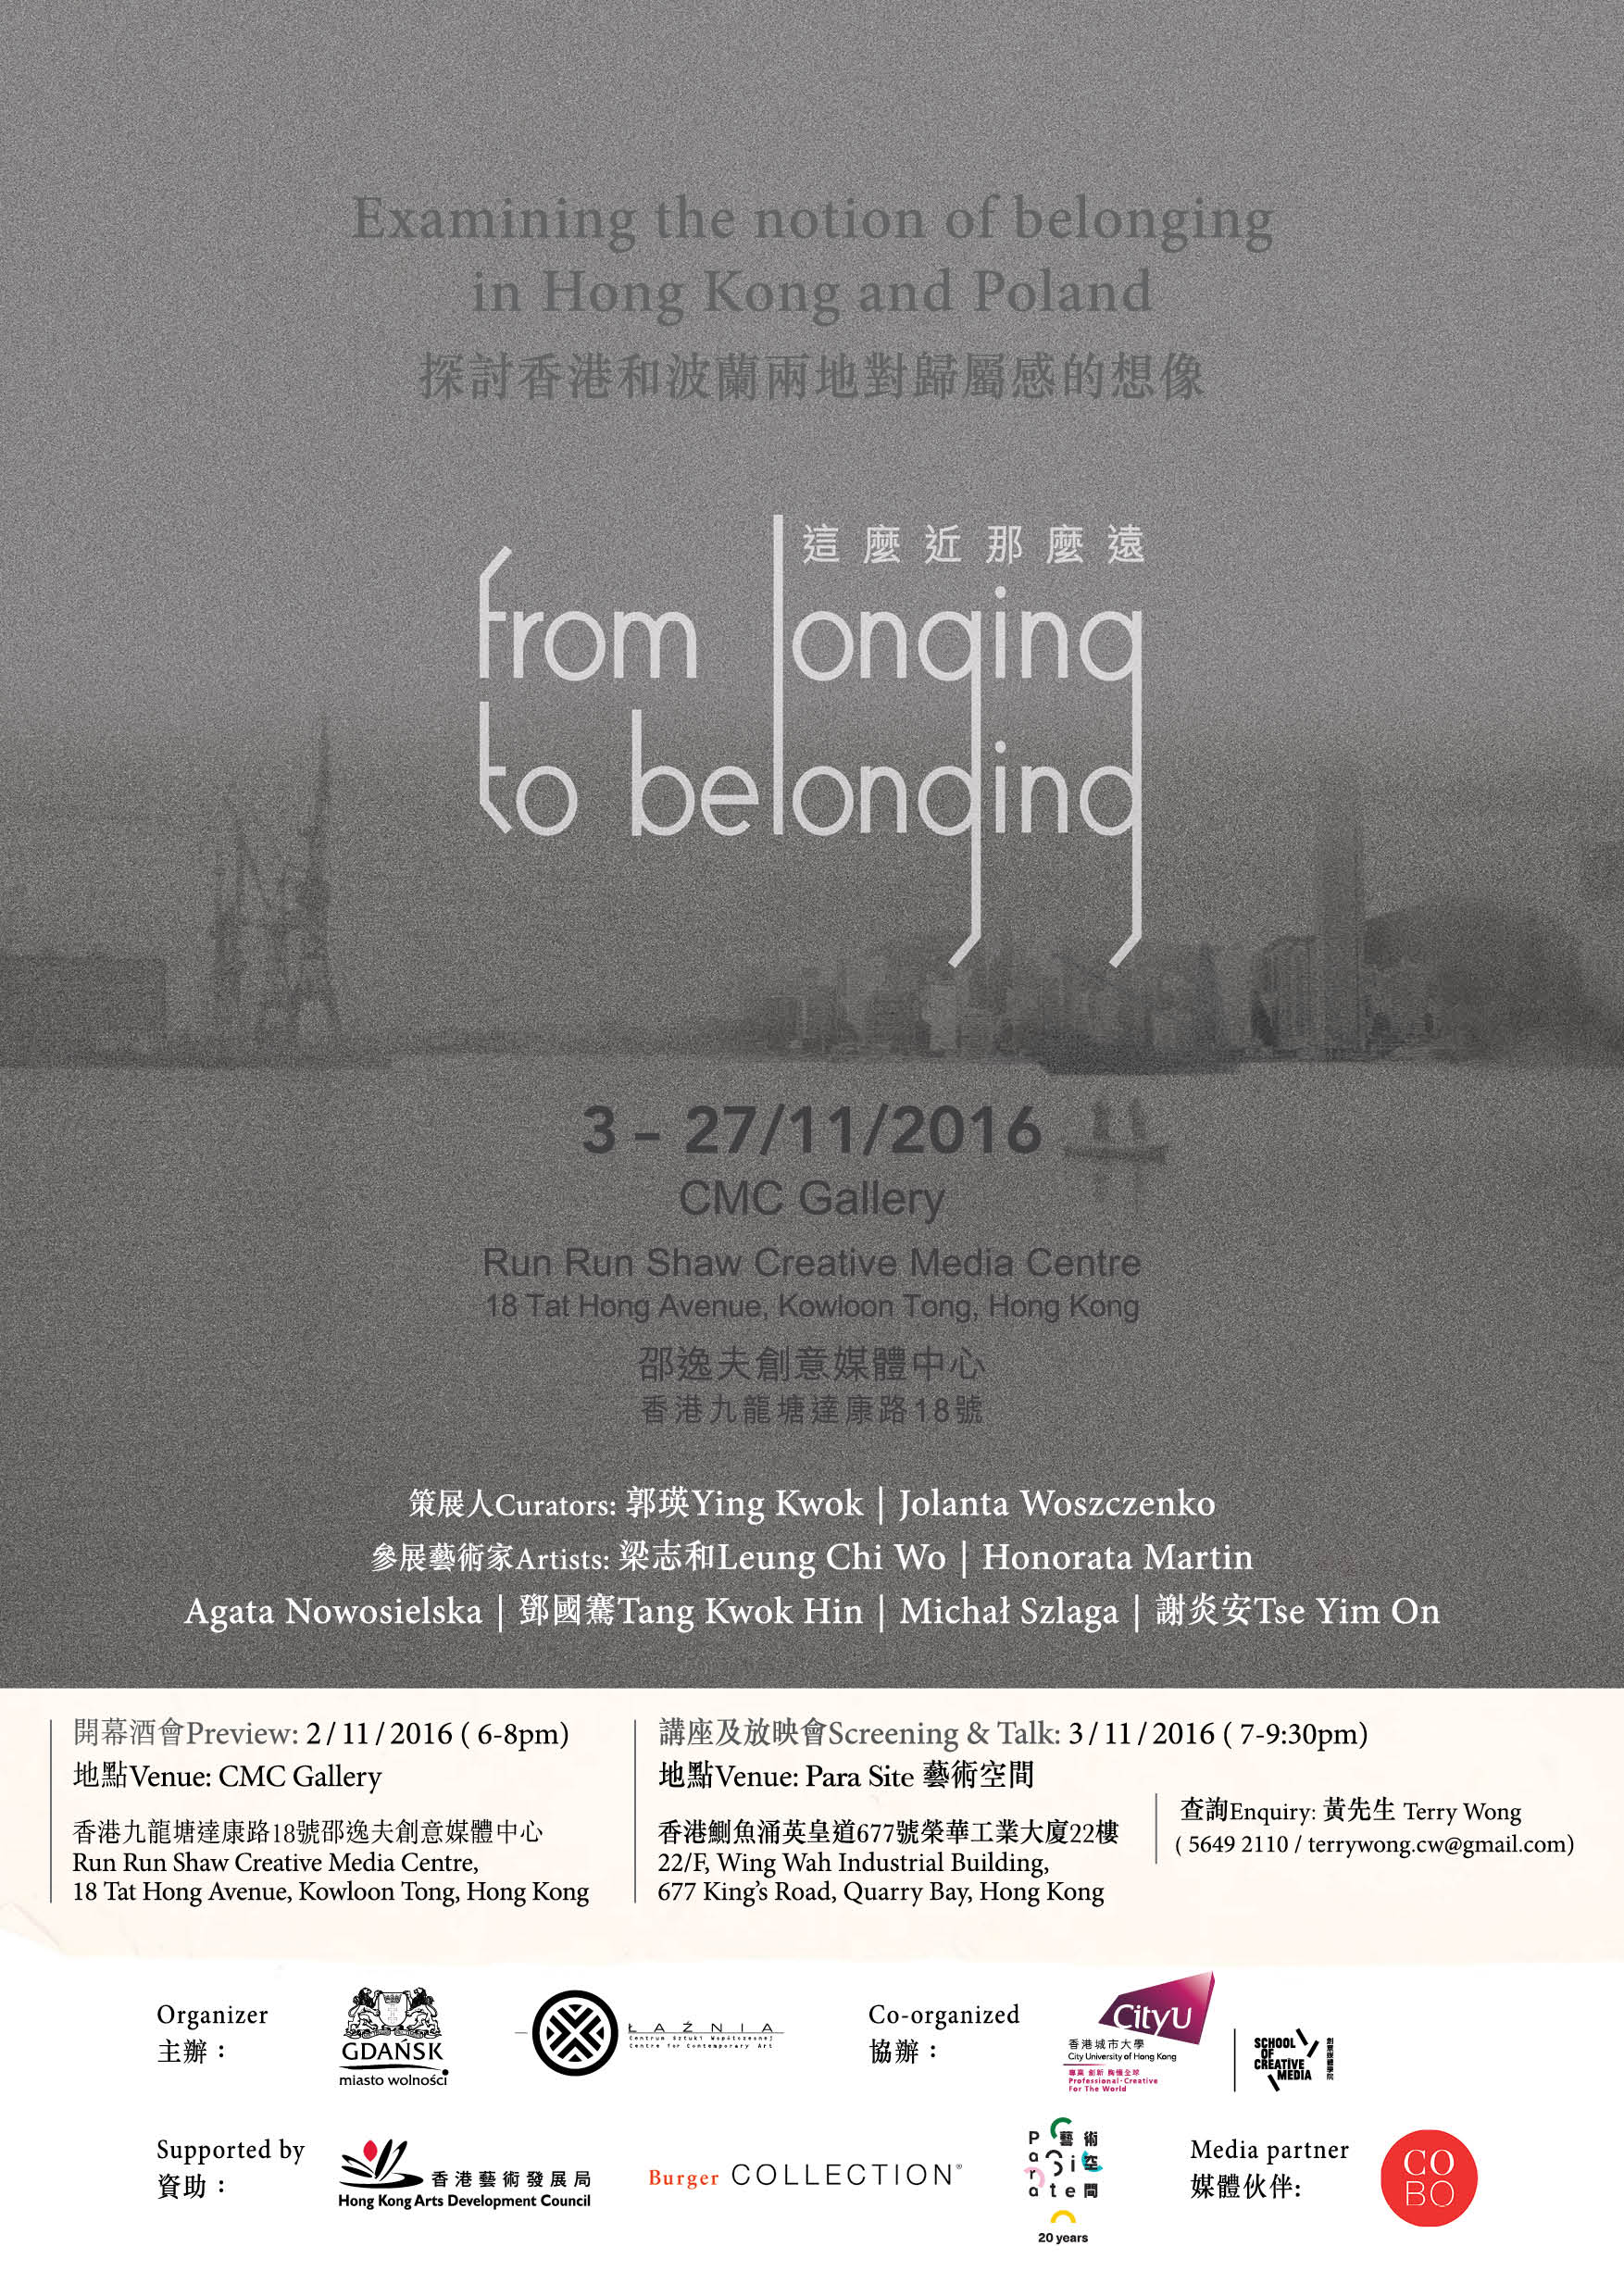 Leung Chi Wo participates in “From Longing to Belonging” at School of Creative Media, City University of Hong Kong